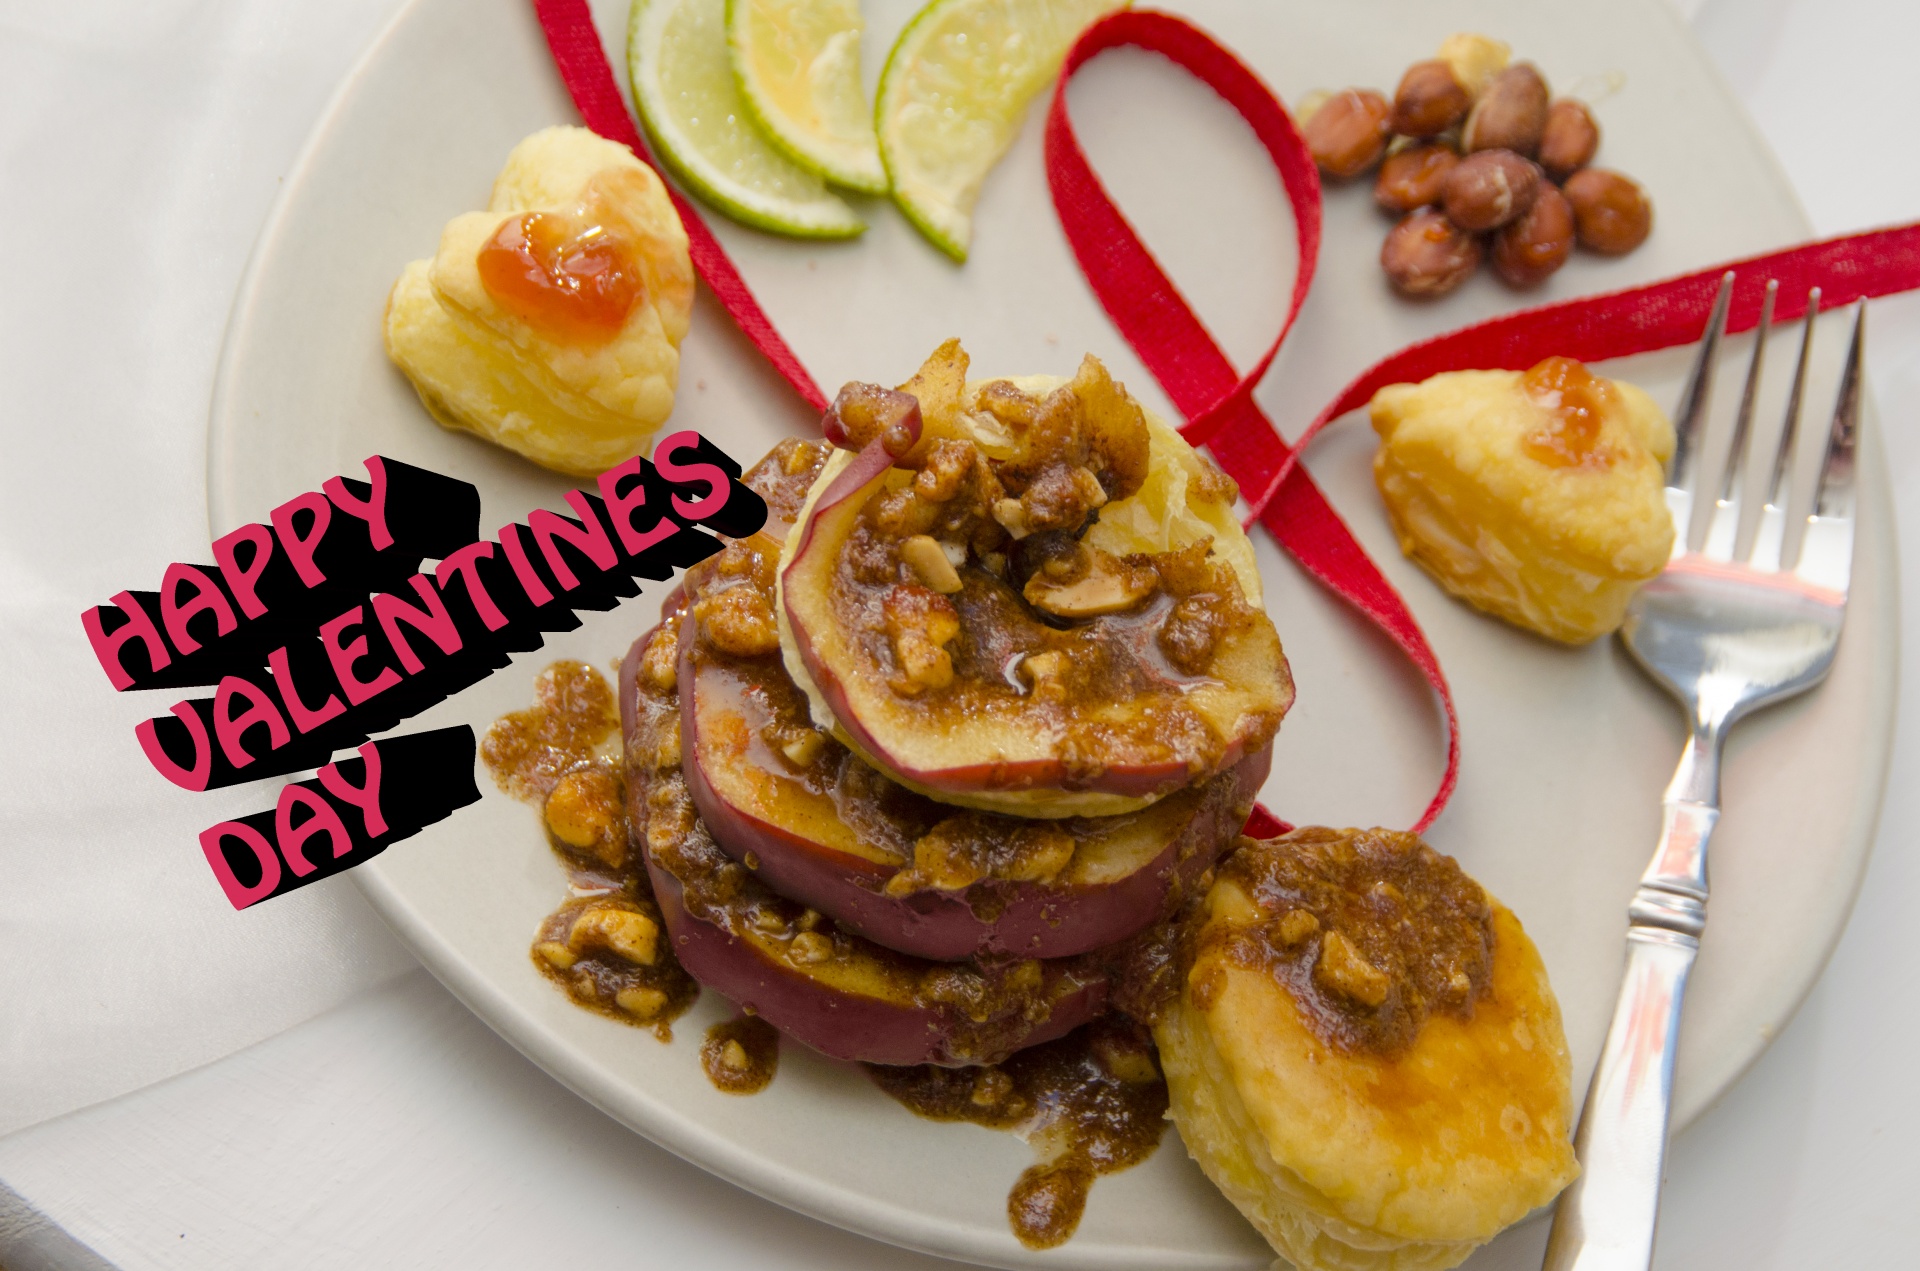 valentines-day-dessert-free-stock-photo-public-domain-pictures